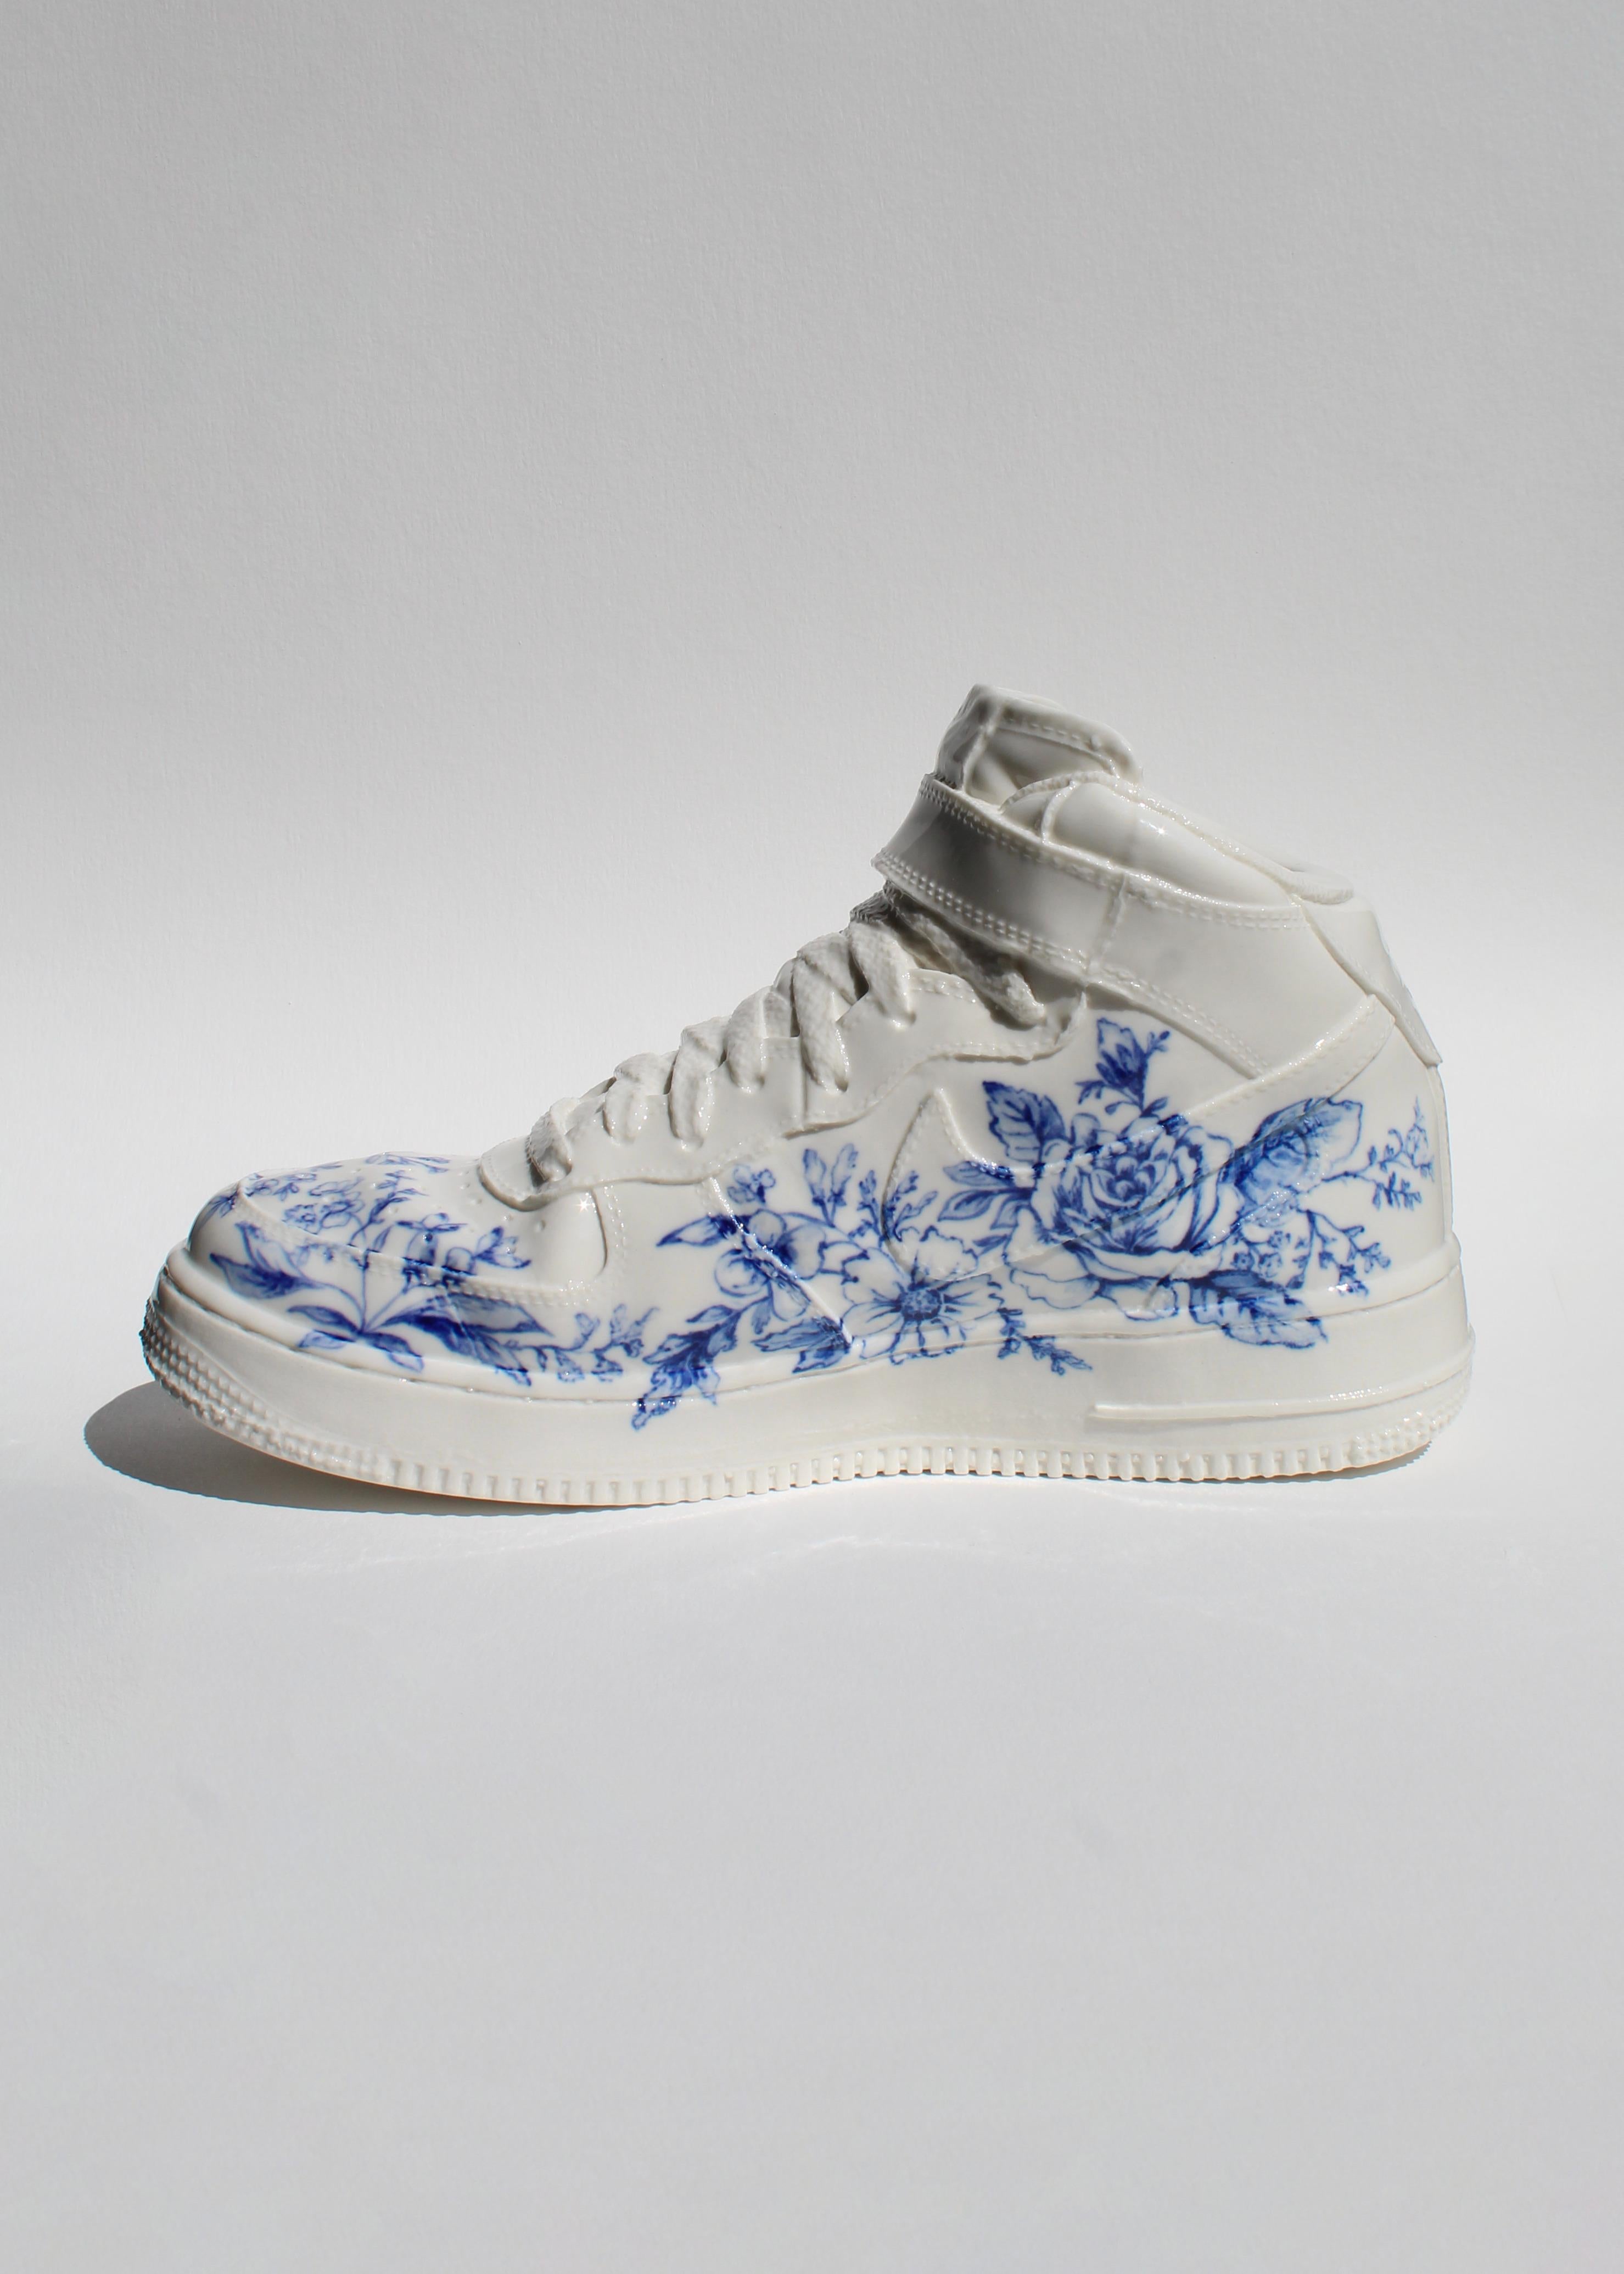 Sculpture Artwork Nike Air Porcelain hand painted by French Artist Maxime Siau  For Sale 1